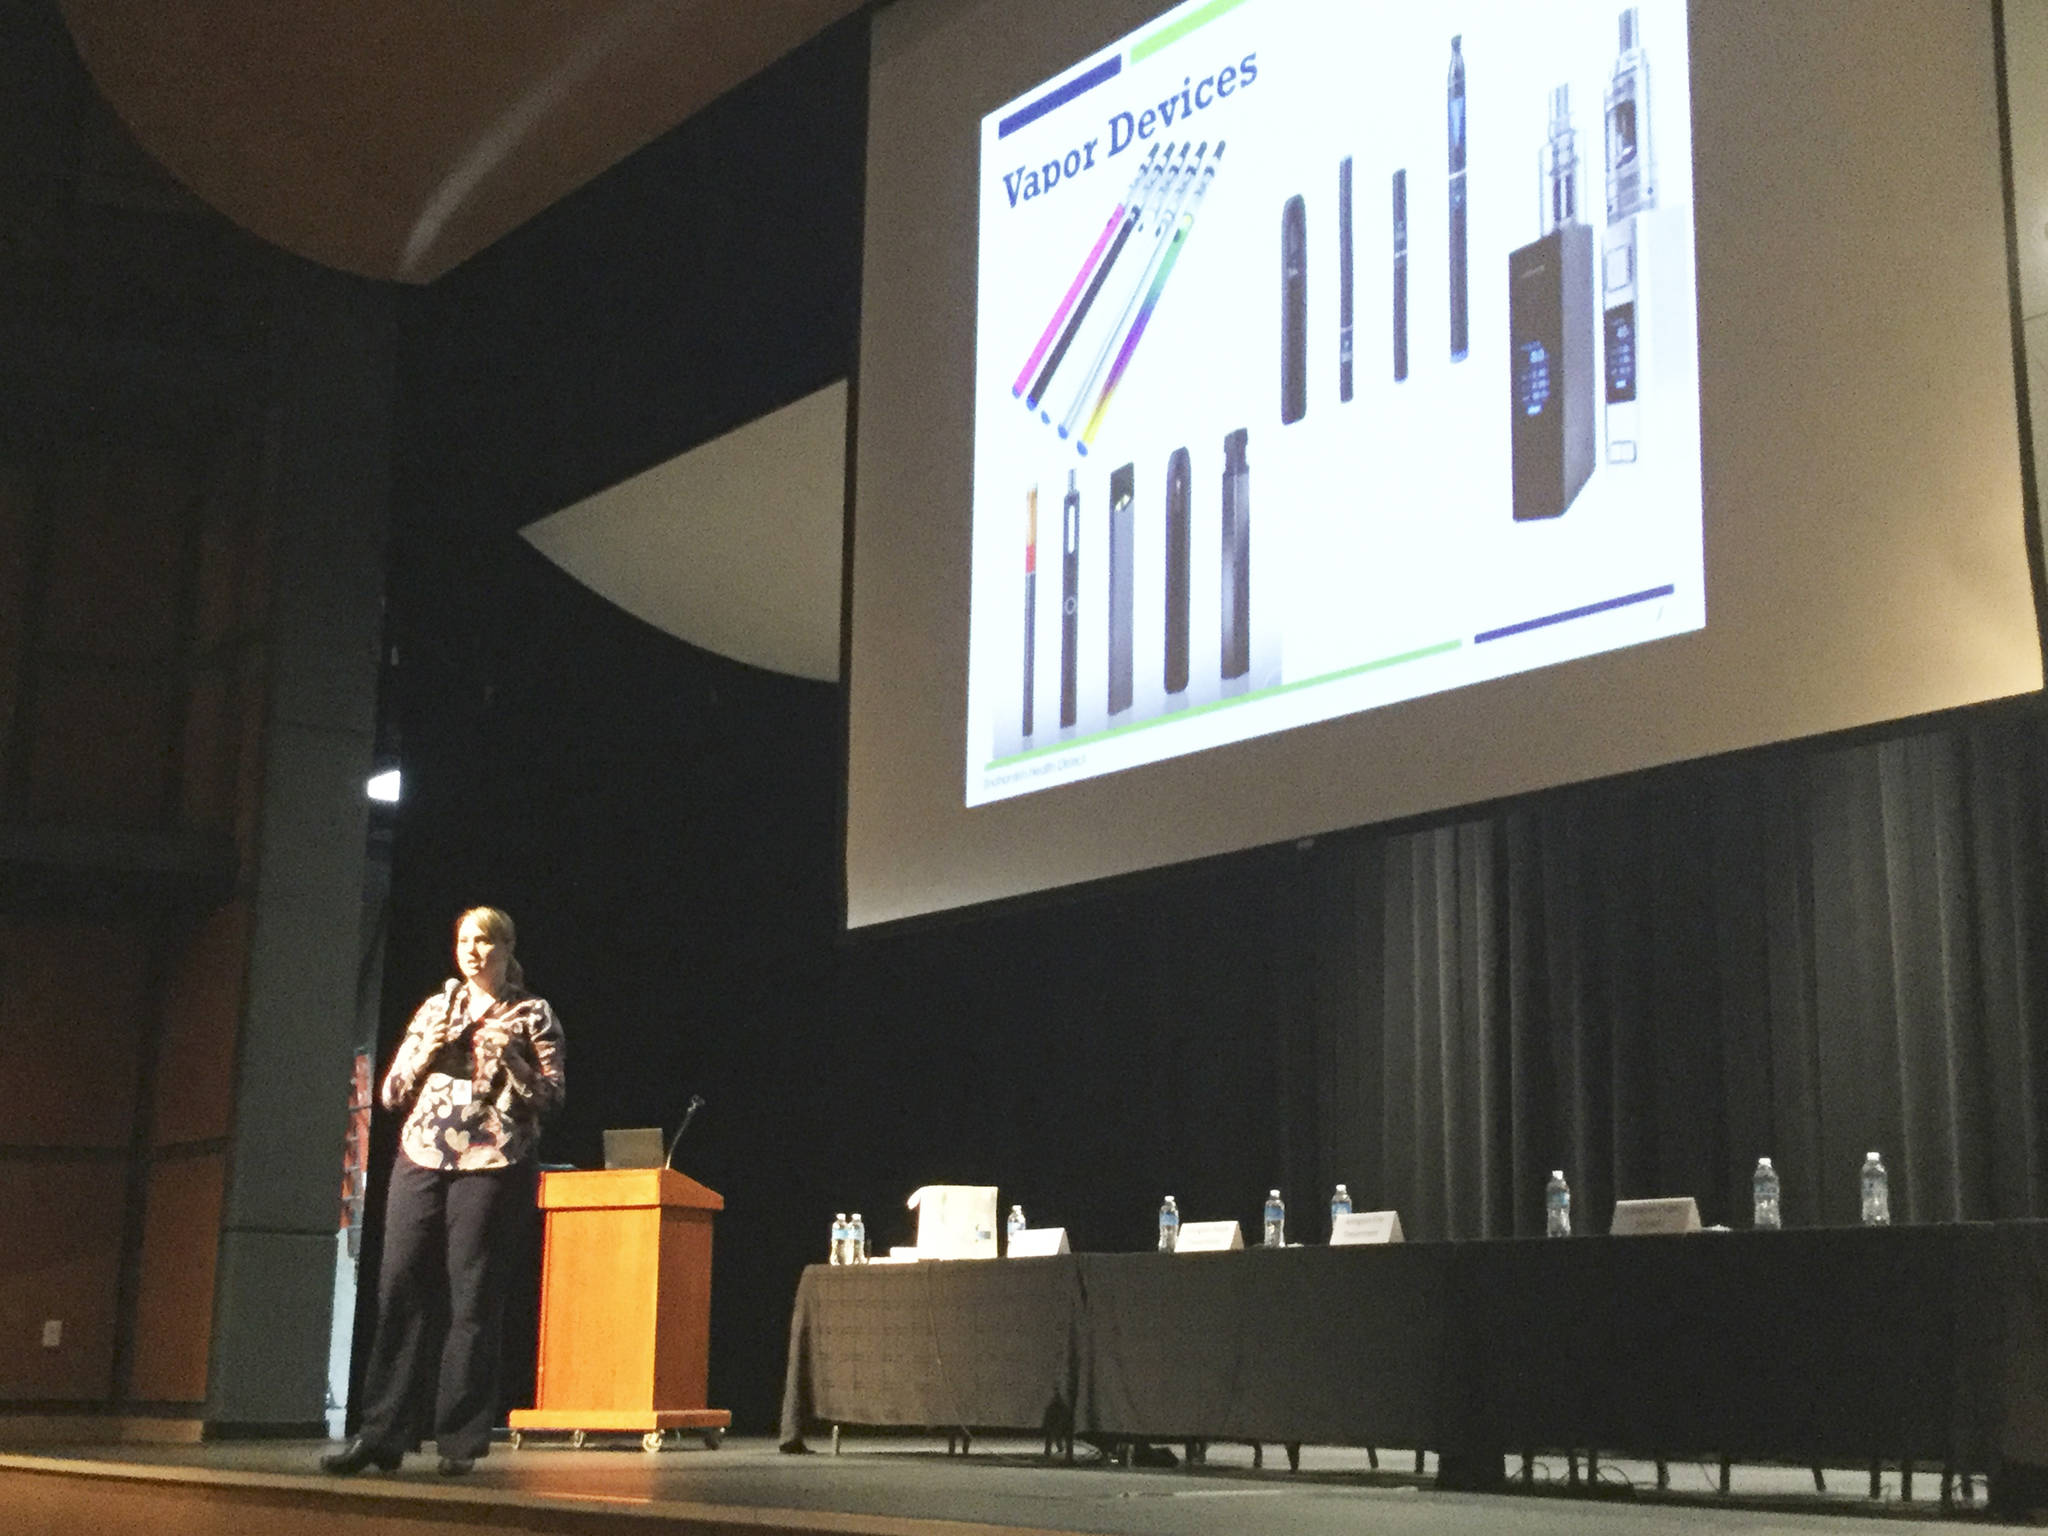 Forum empowers parents to learn more about vaping, JUULing, drug use